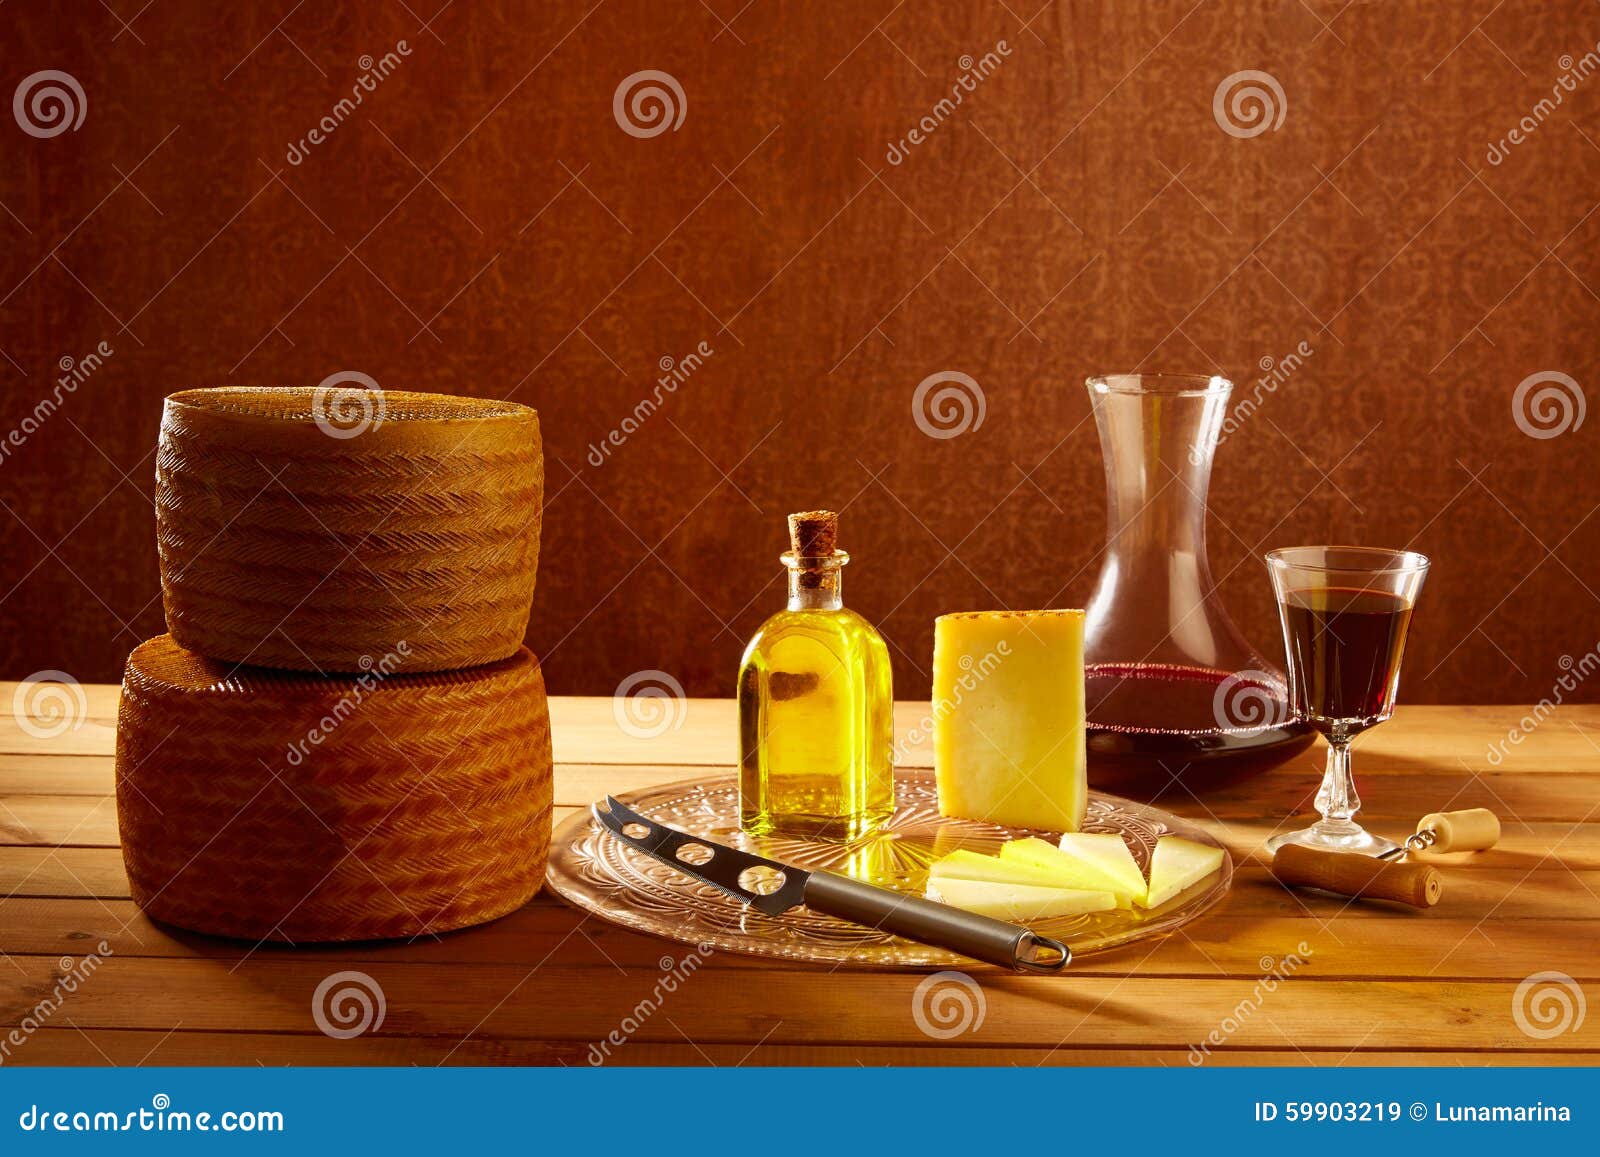 manchego cheese from spain in wooden table